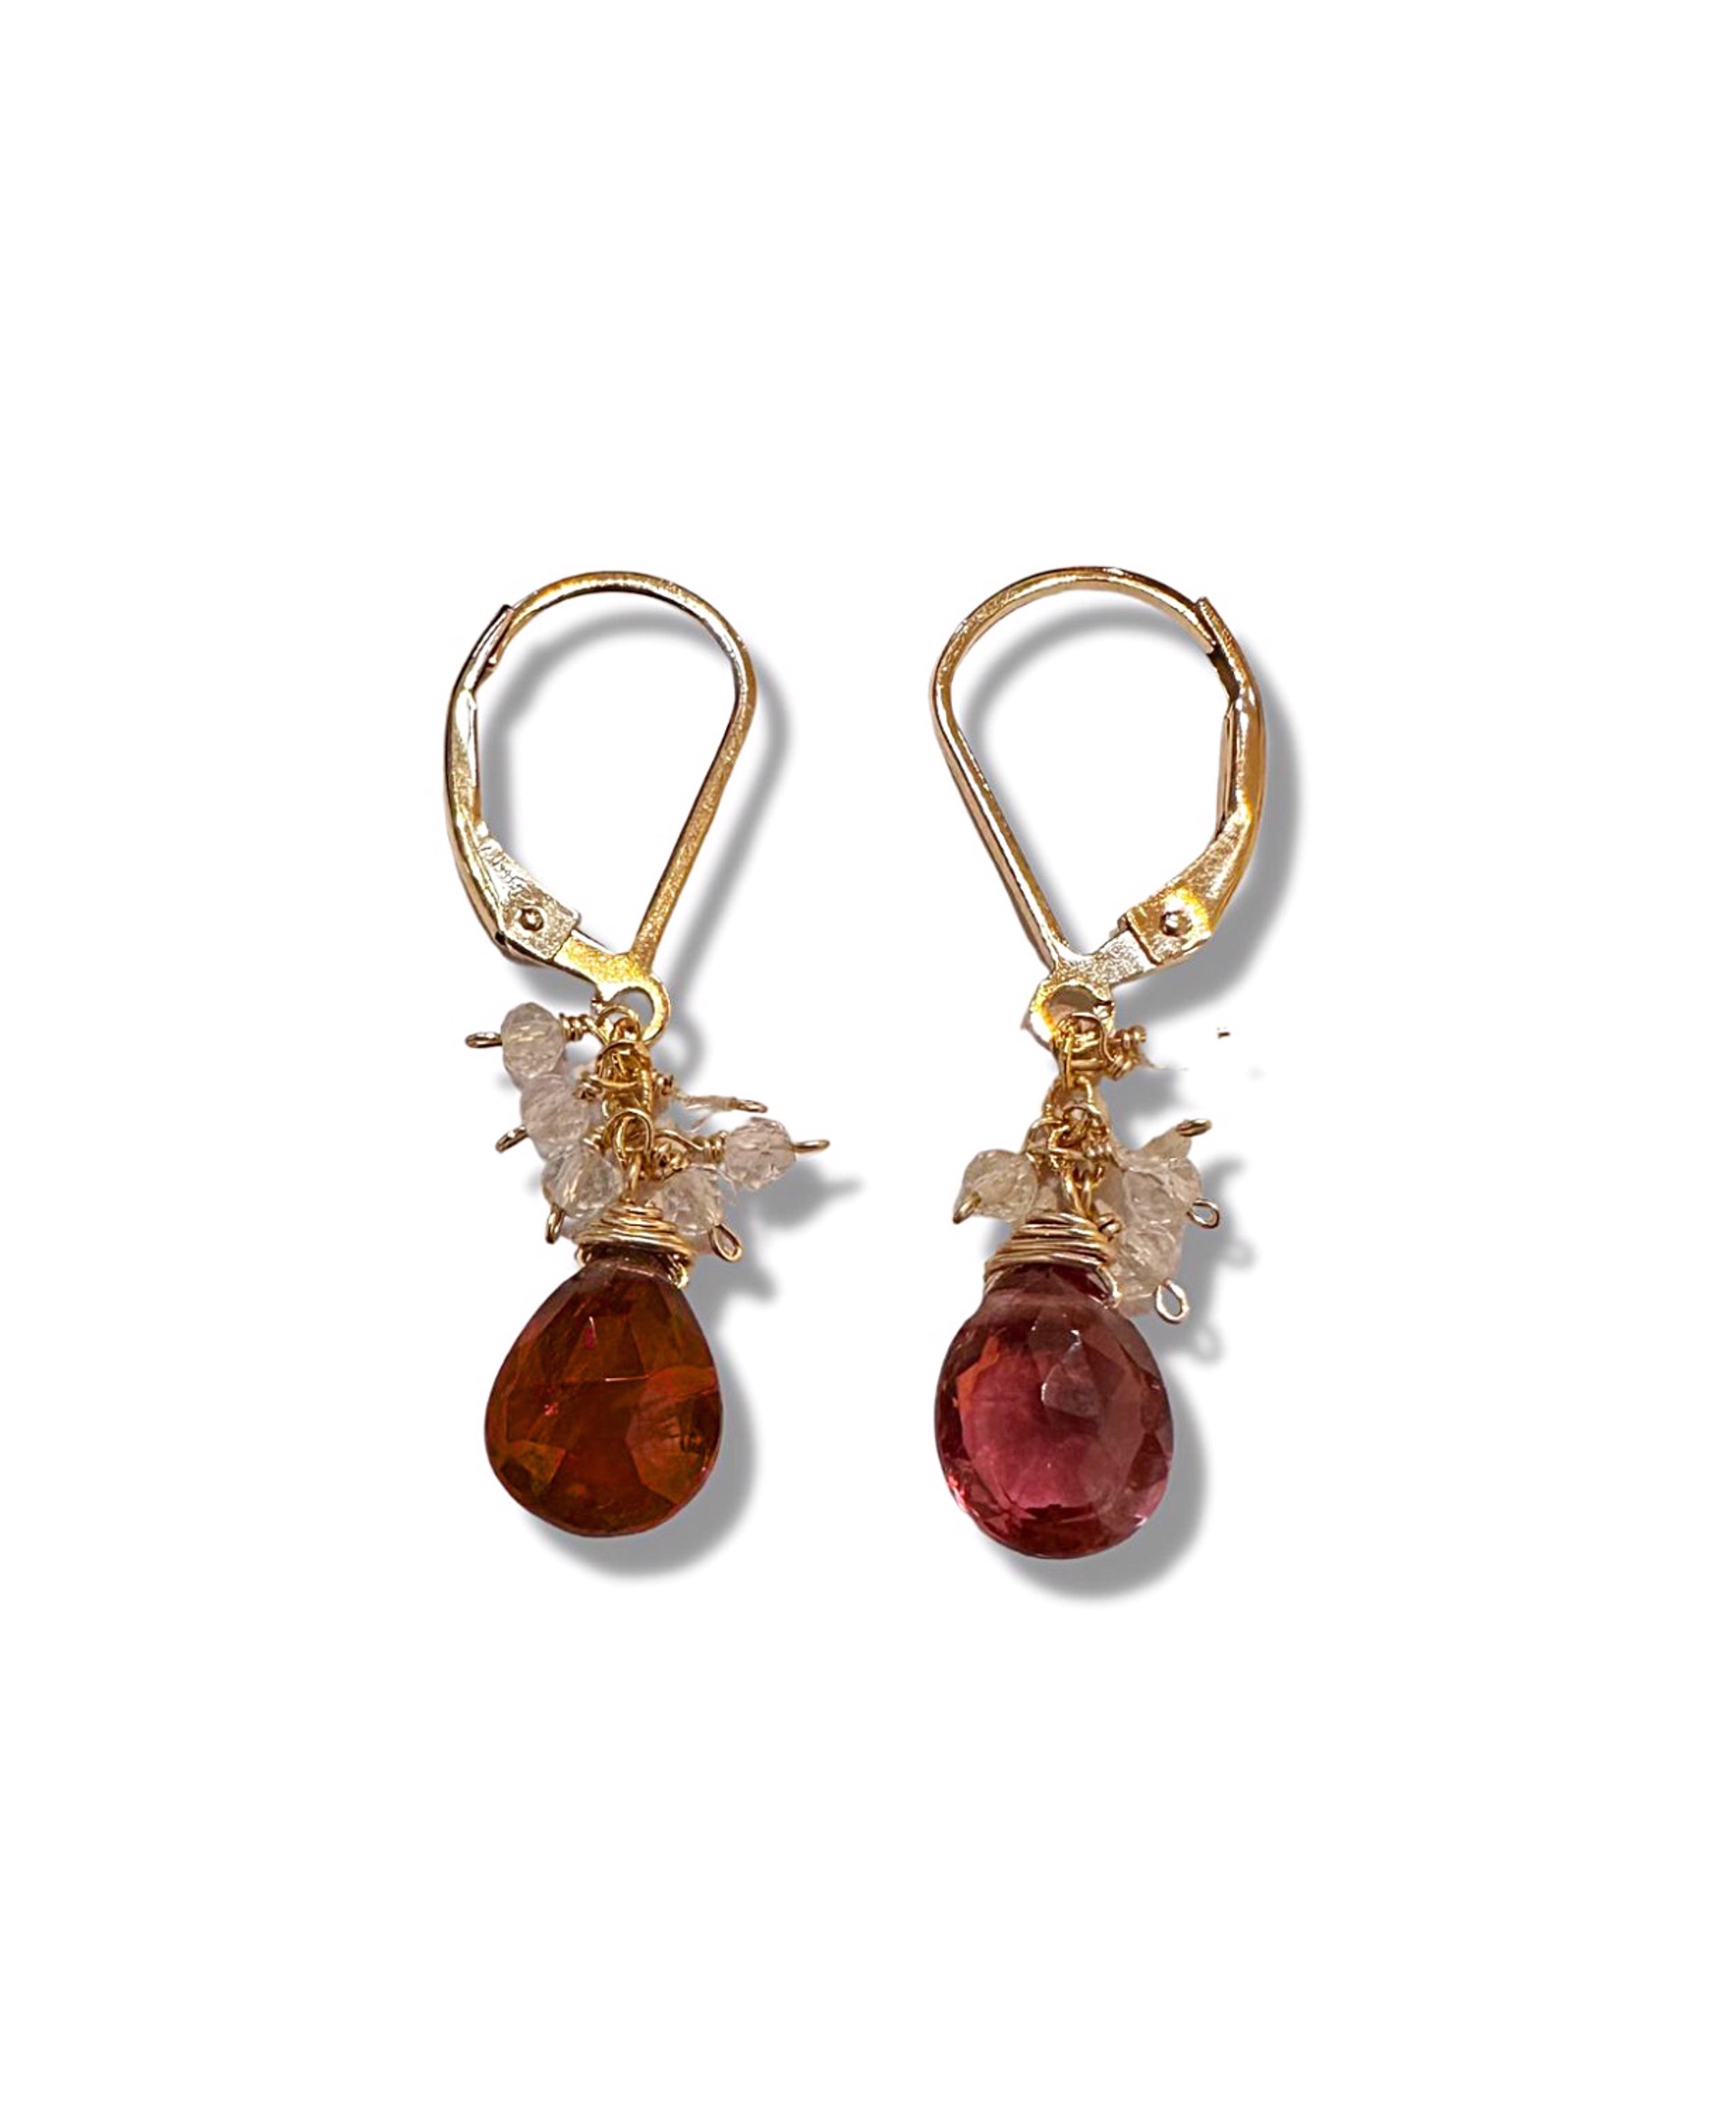 Earrings - Zircon and Tourmaline Drops with 14K Gold Filling by Julia Balestracci